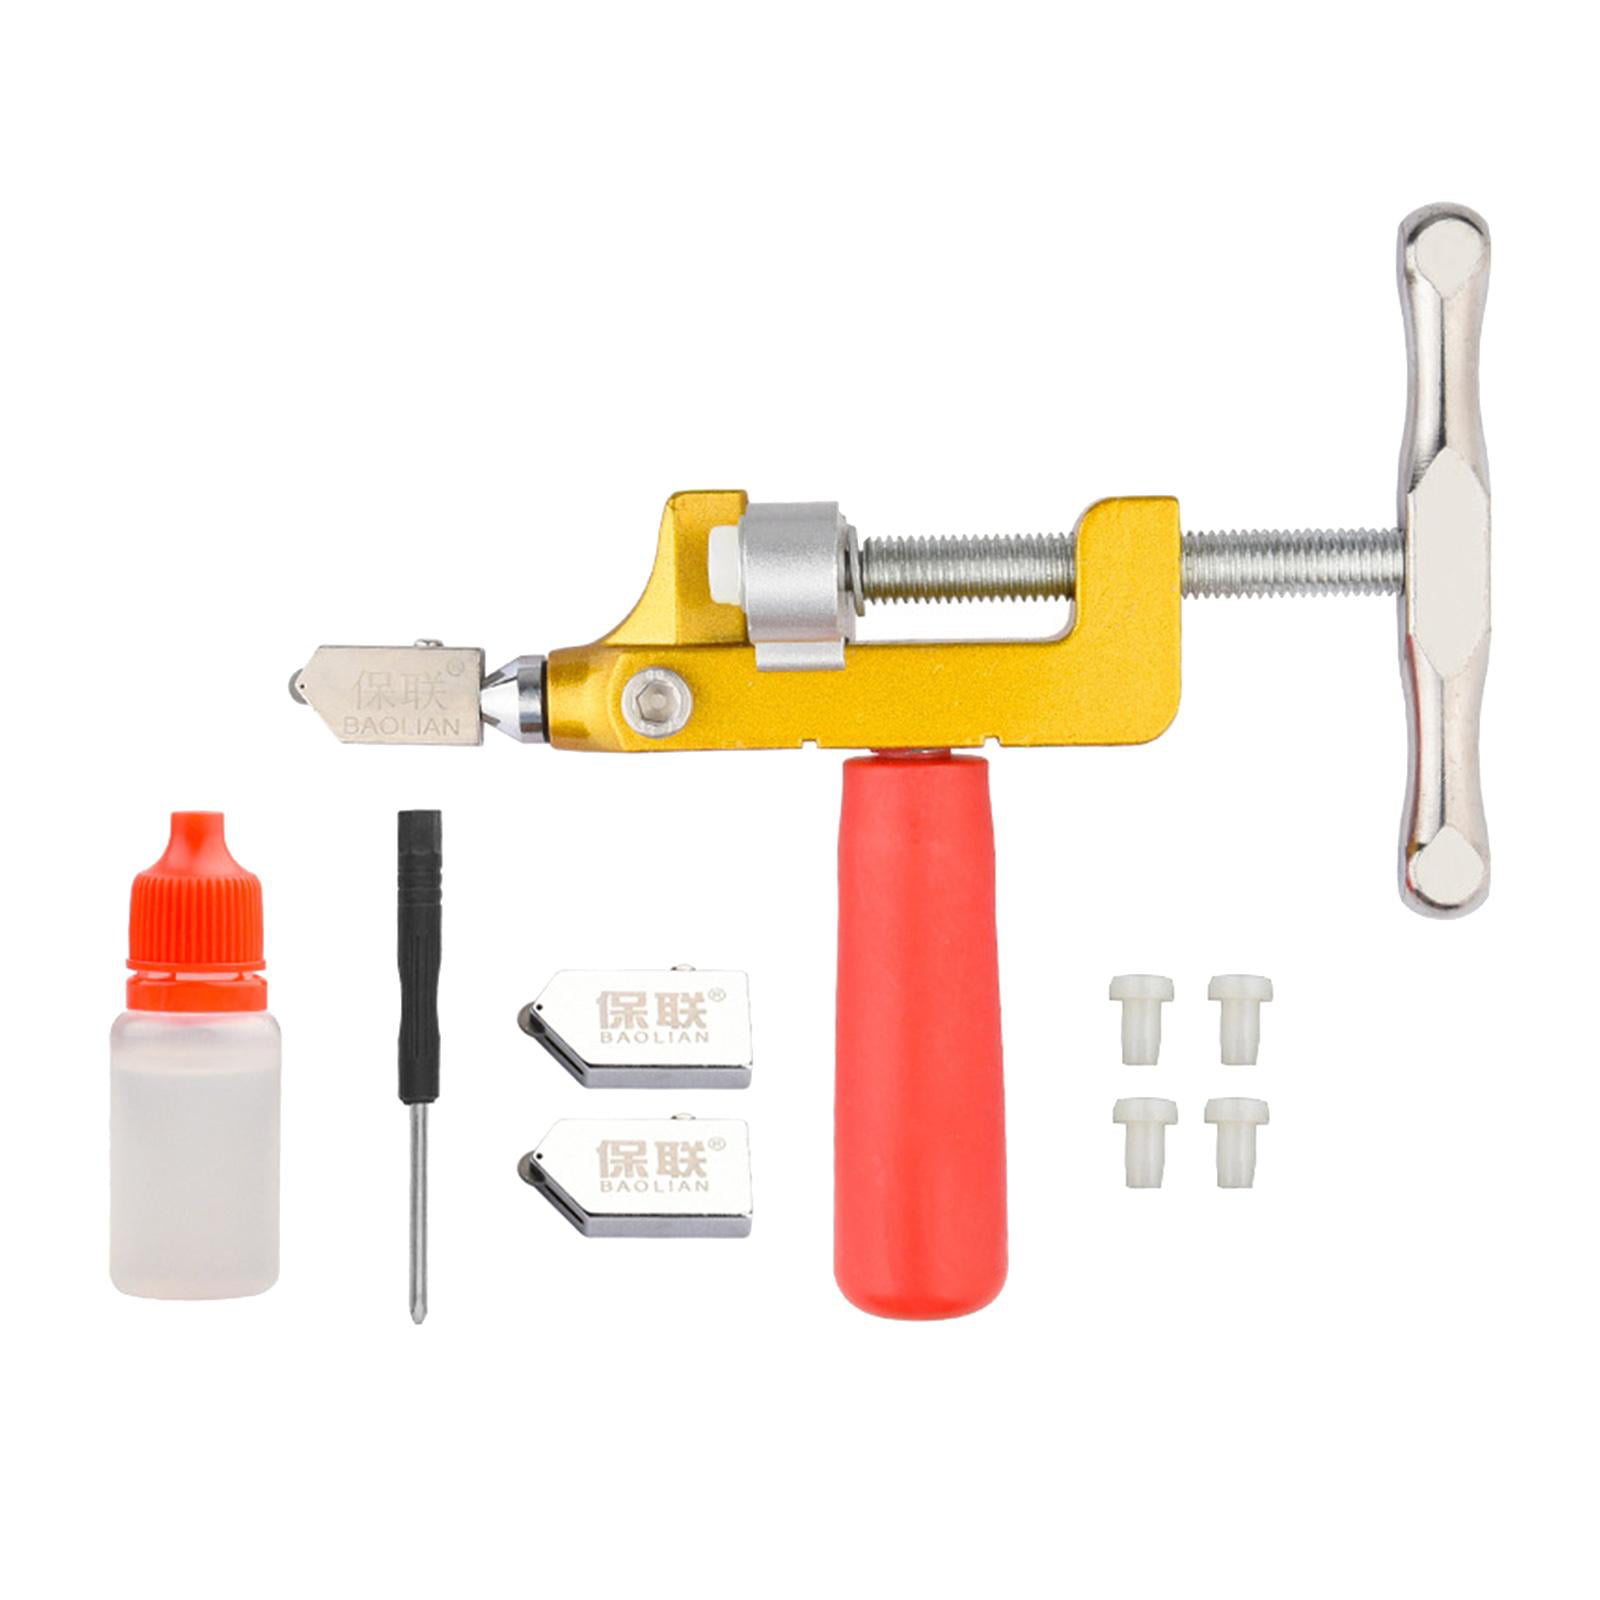 Manual Tile Cutter, 2 in 1 Glass Tile Cutter Hand Tool with Glass Breaking  Pliers, Mirror Cutting Kit with 3 Tungsten Steel Blade for Home DIY Cutting